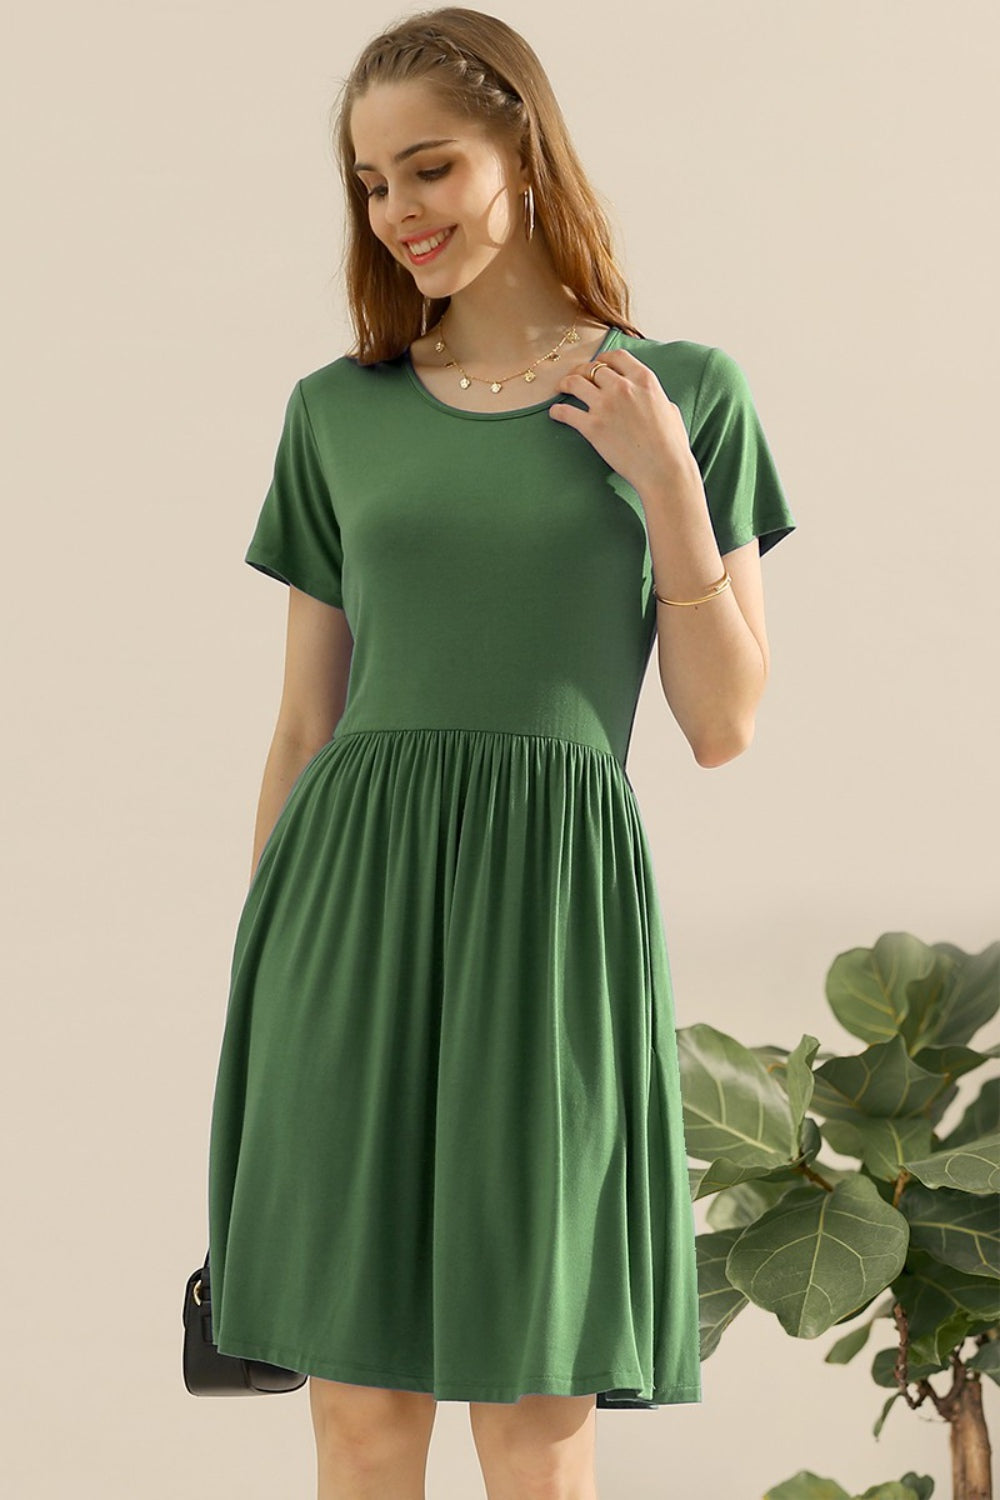 Ninexis Full Size Round Neck Ruched Dress with Pockets - OLIVE / S - DRESSES - Mixed